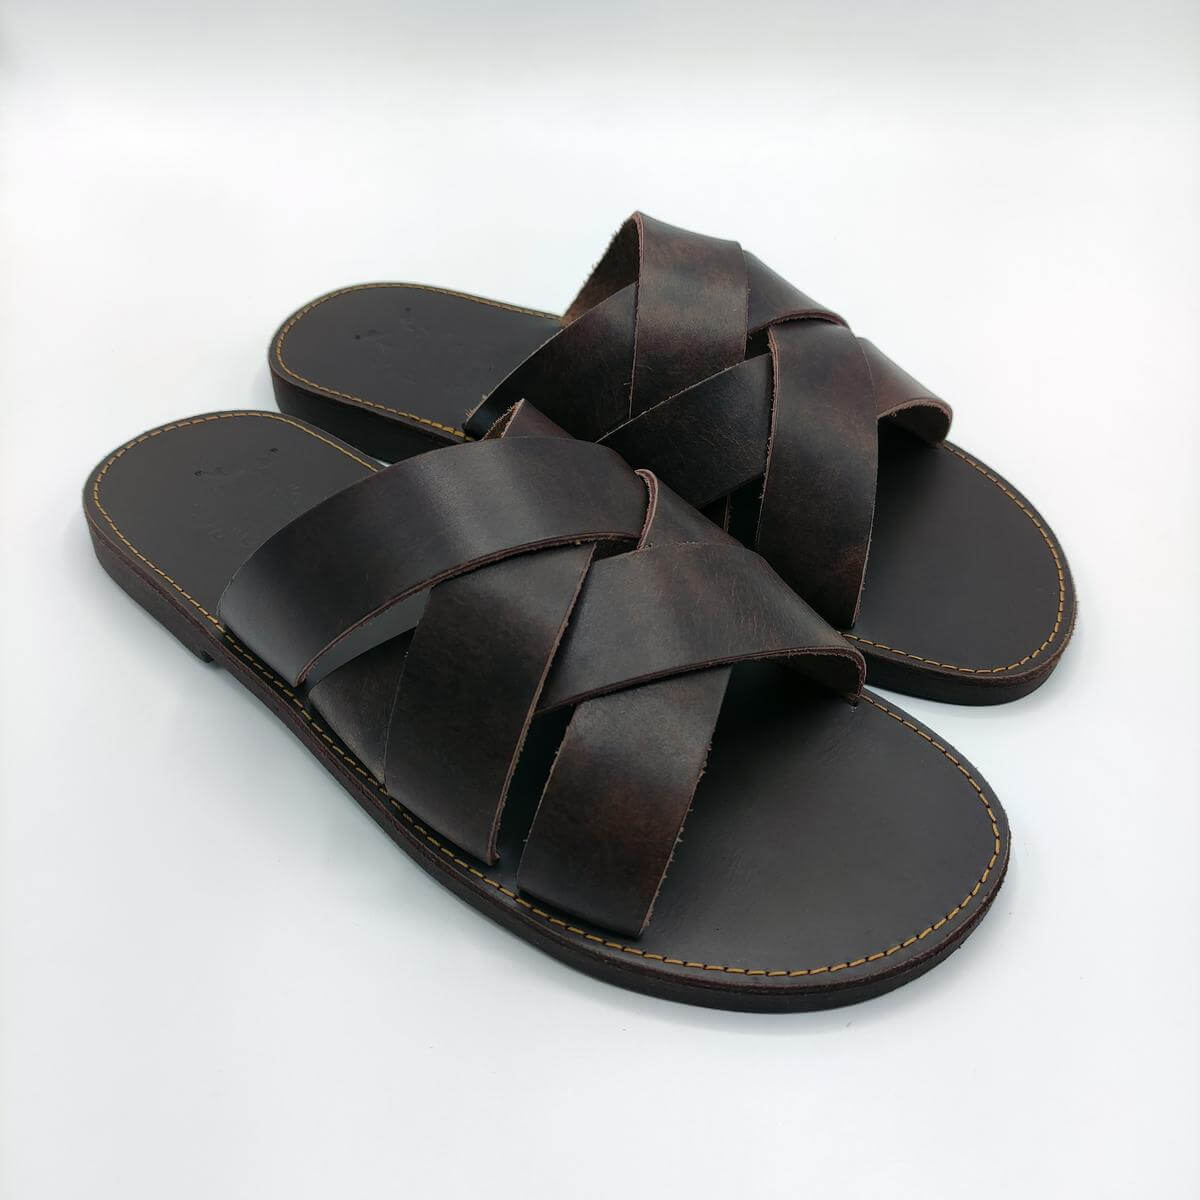 fashionable sandals mens total brown